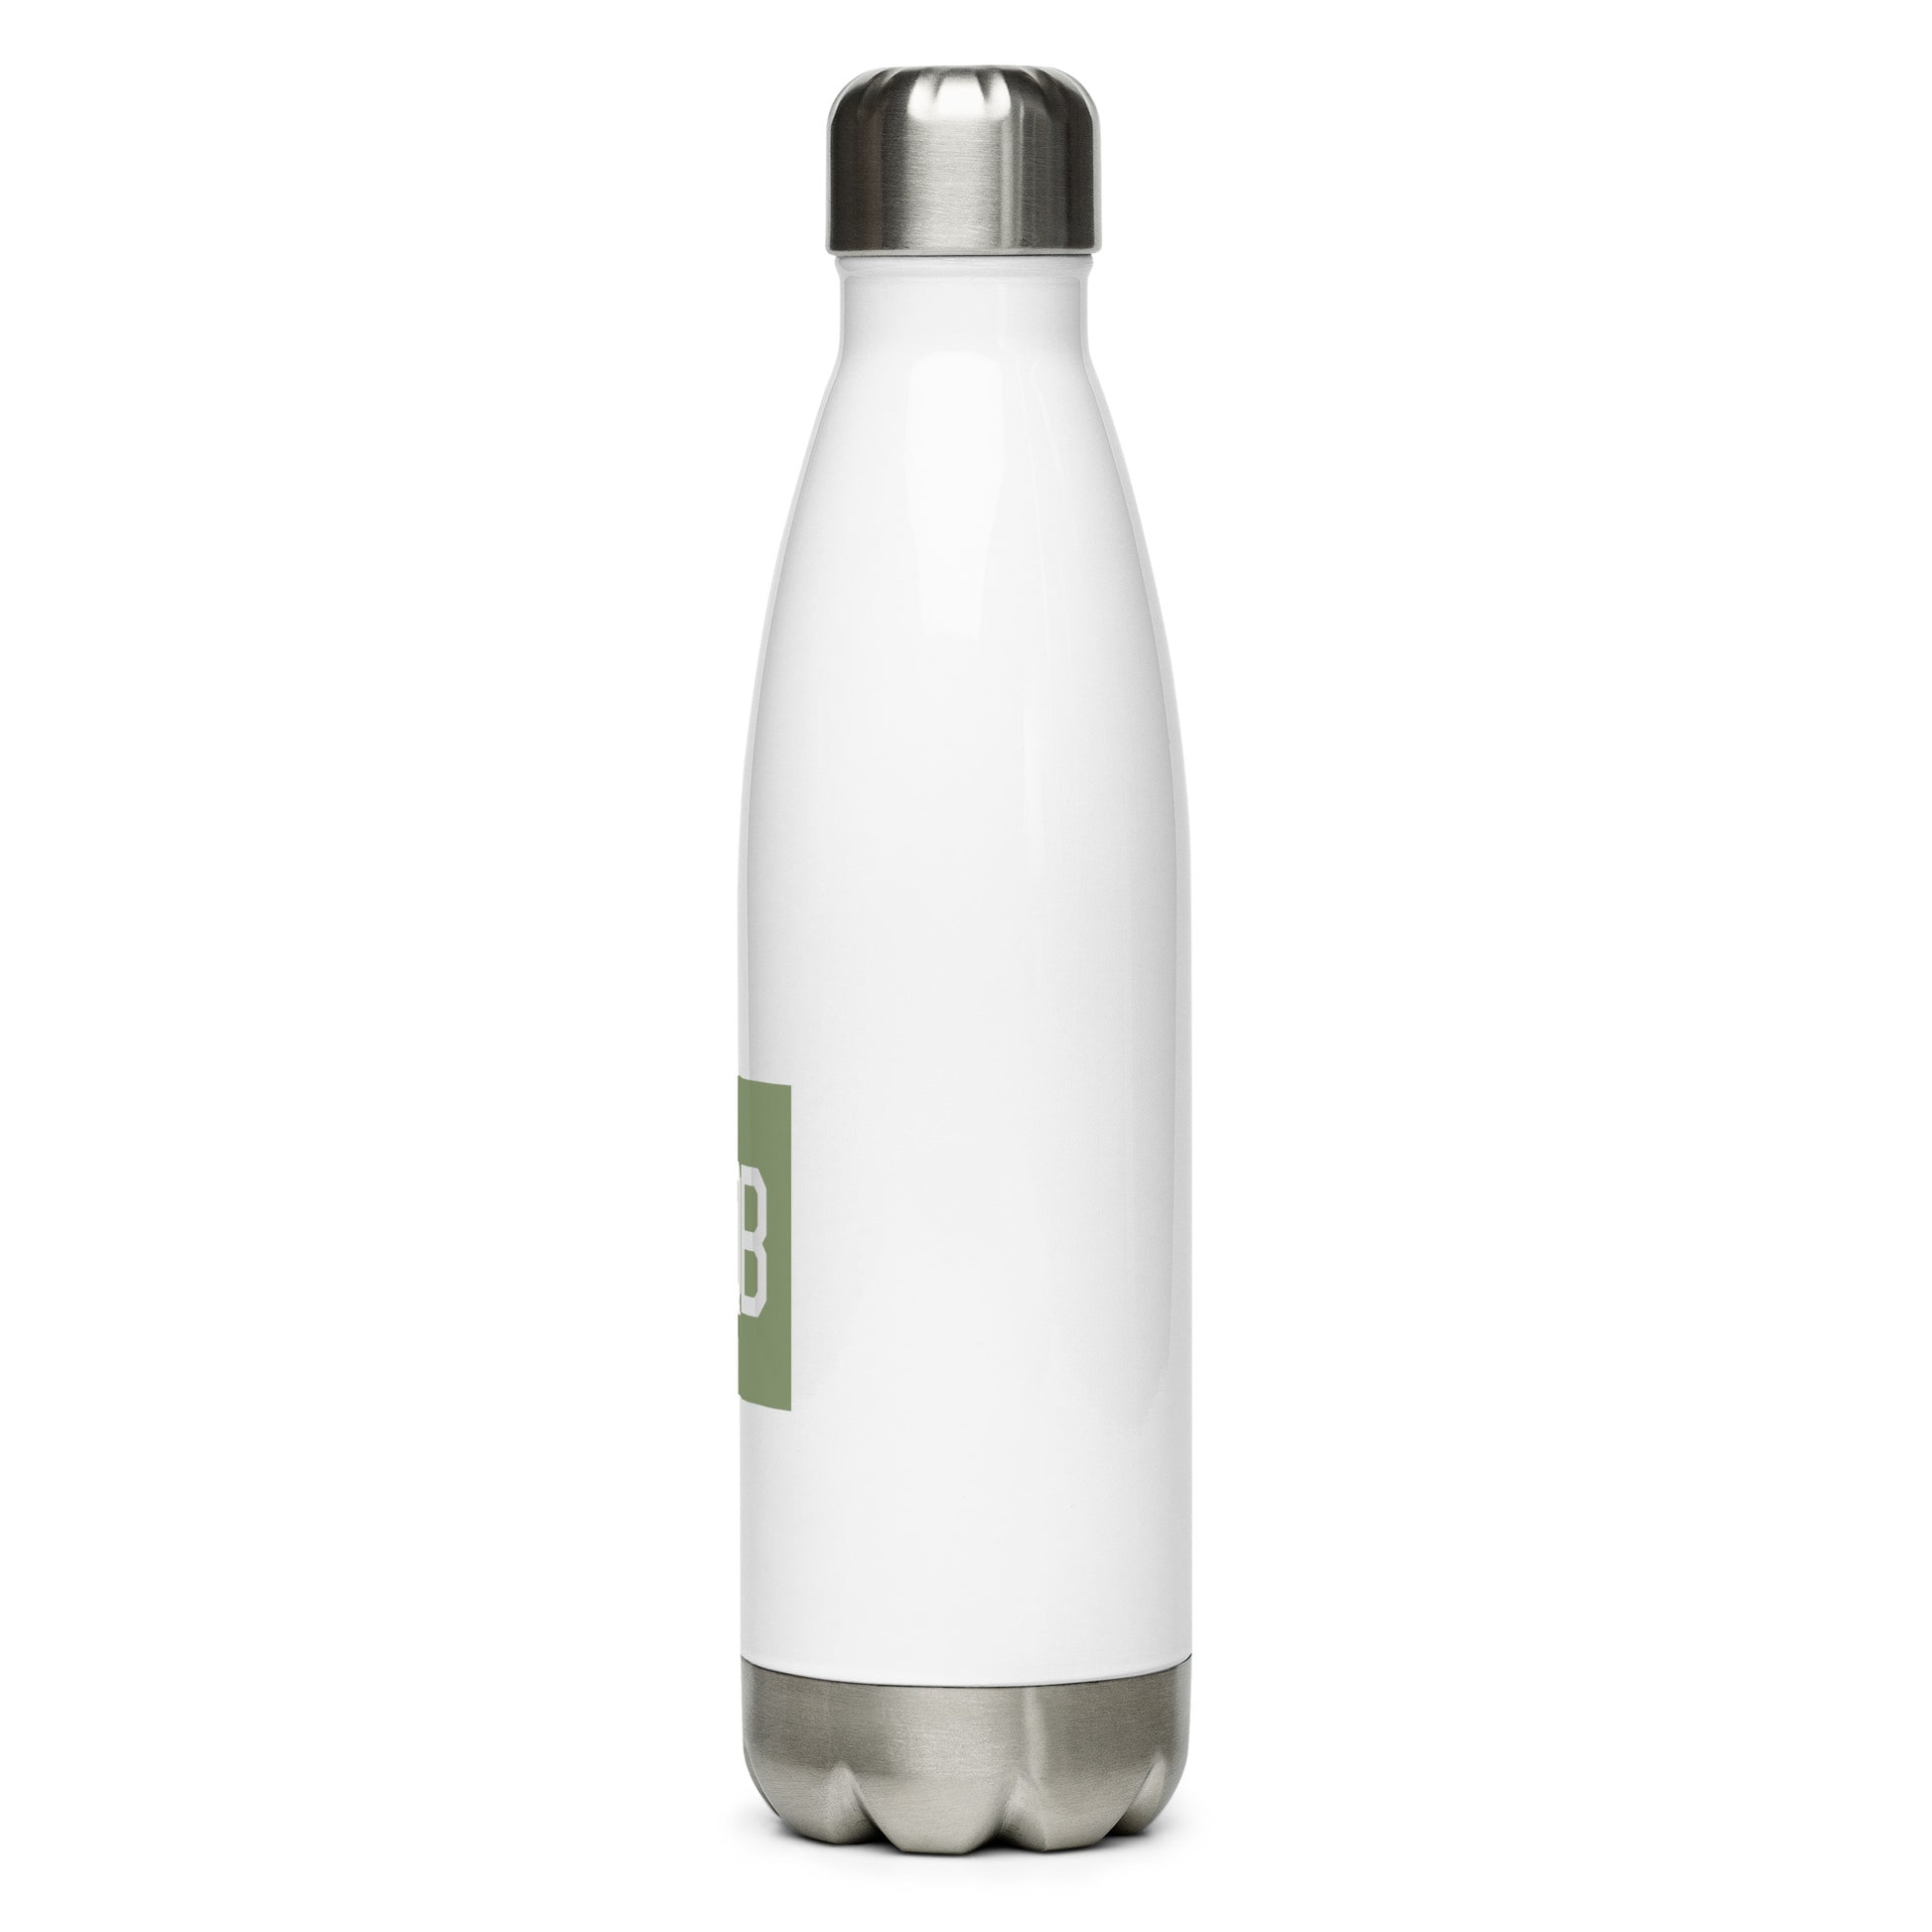 Aviation Gift Water Bottle - Camo Green • YQB Quebec City • YHM Designs - Image 08